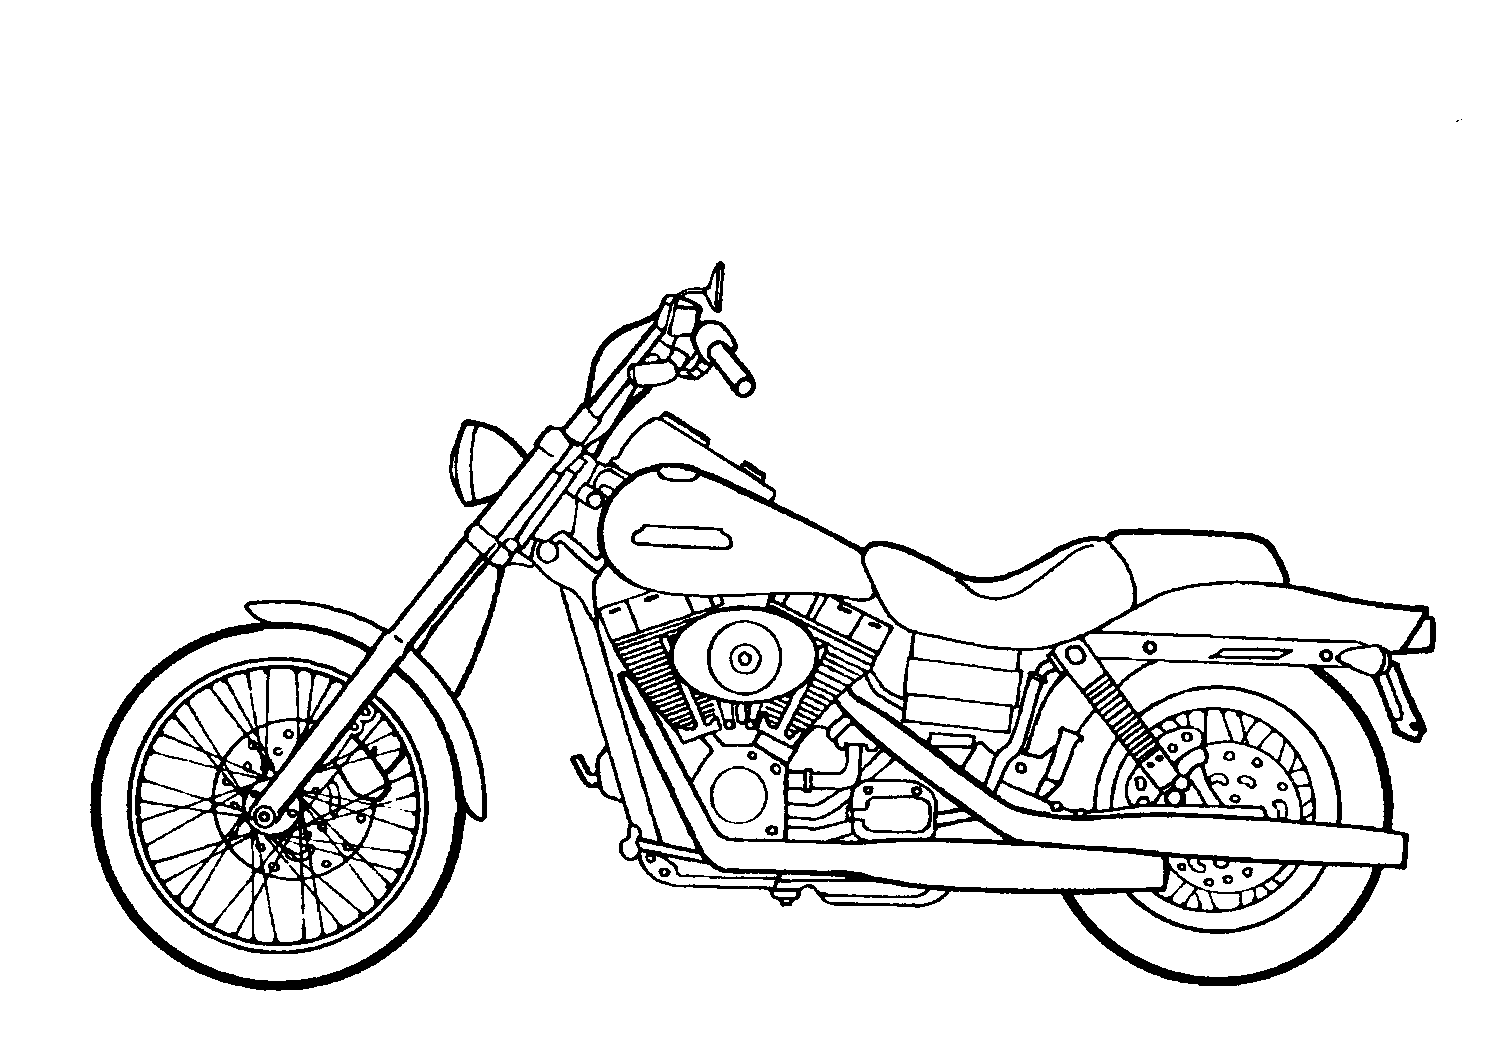 Download Free Printable Motorcycle Coloring Pages For Kids